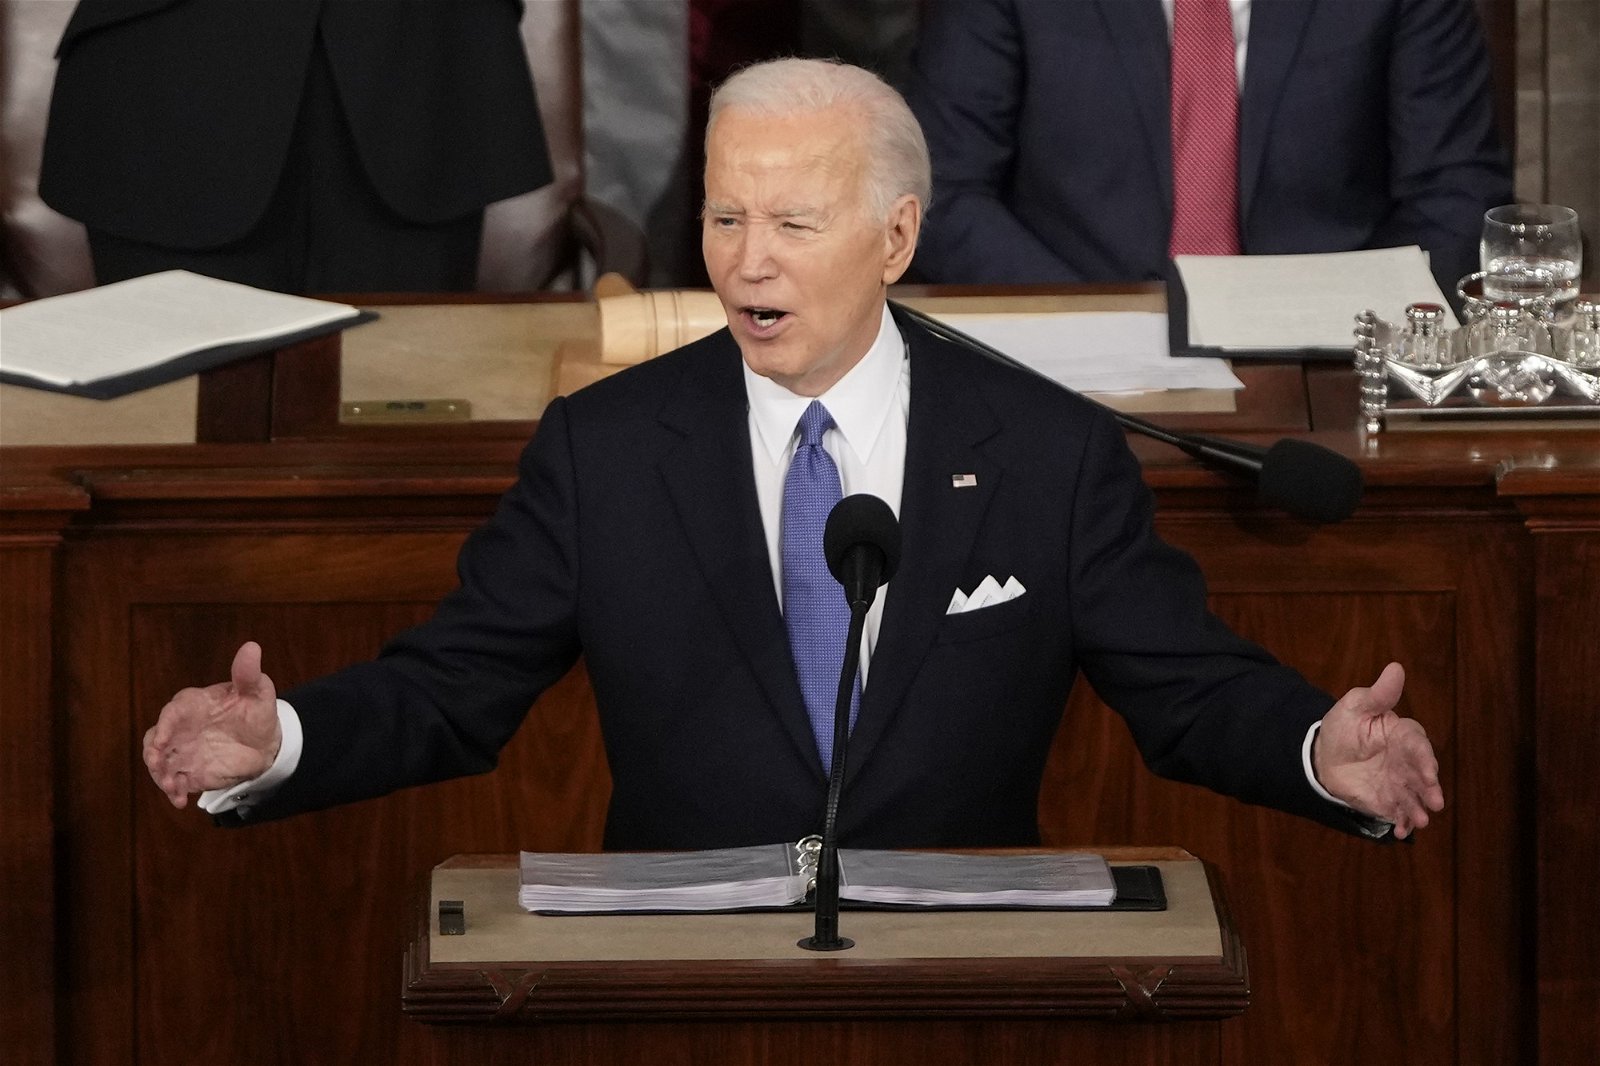 Joe Biden holds his arms out wide either side of the microphone